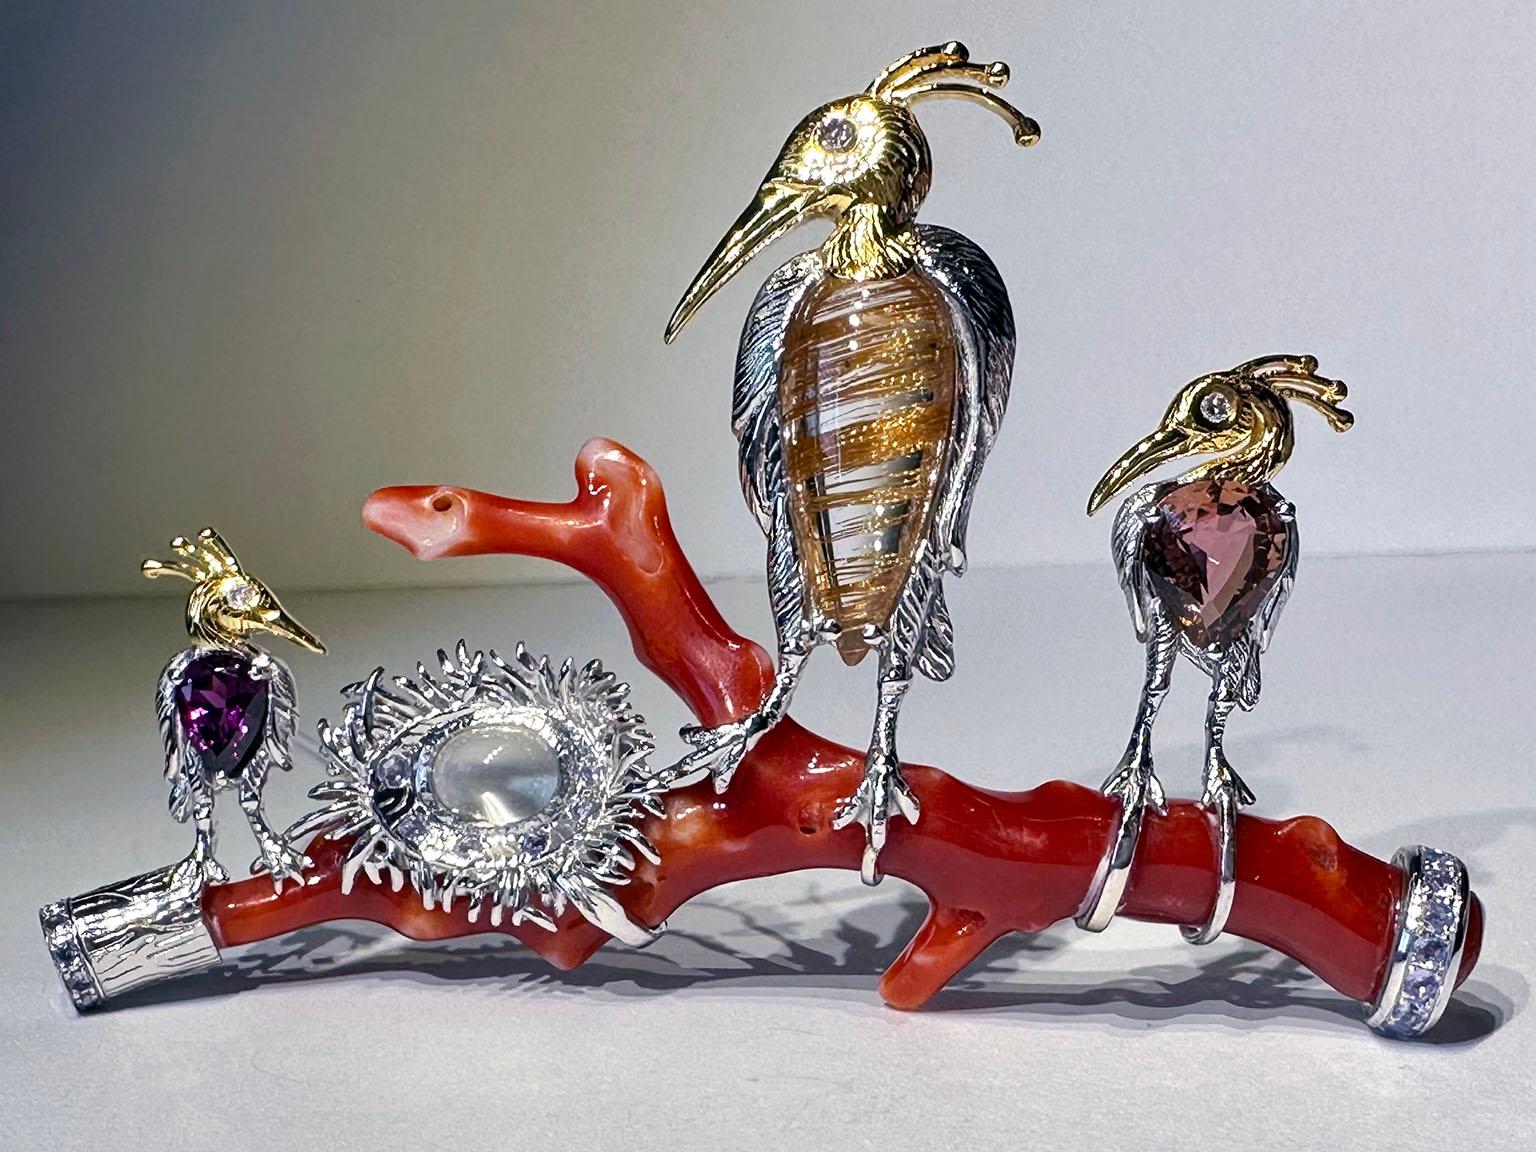 This is a one-of-a-kind masterpiece by Kary Adam. A Whimsical Bird Roost Brooch featuring a Red Coral Branch, perched on by 3 birds, set with a pear cut Rhodolite Garnet, a pear cabochon Rutile Quartz and a pear cut Pink Tourmaline. Each bird has a